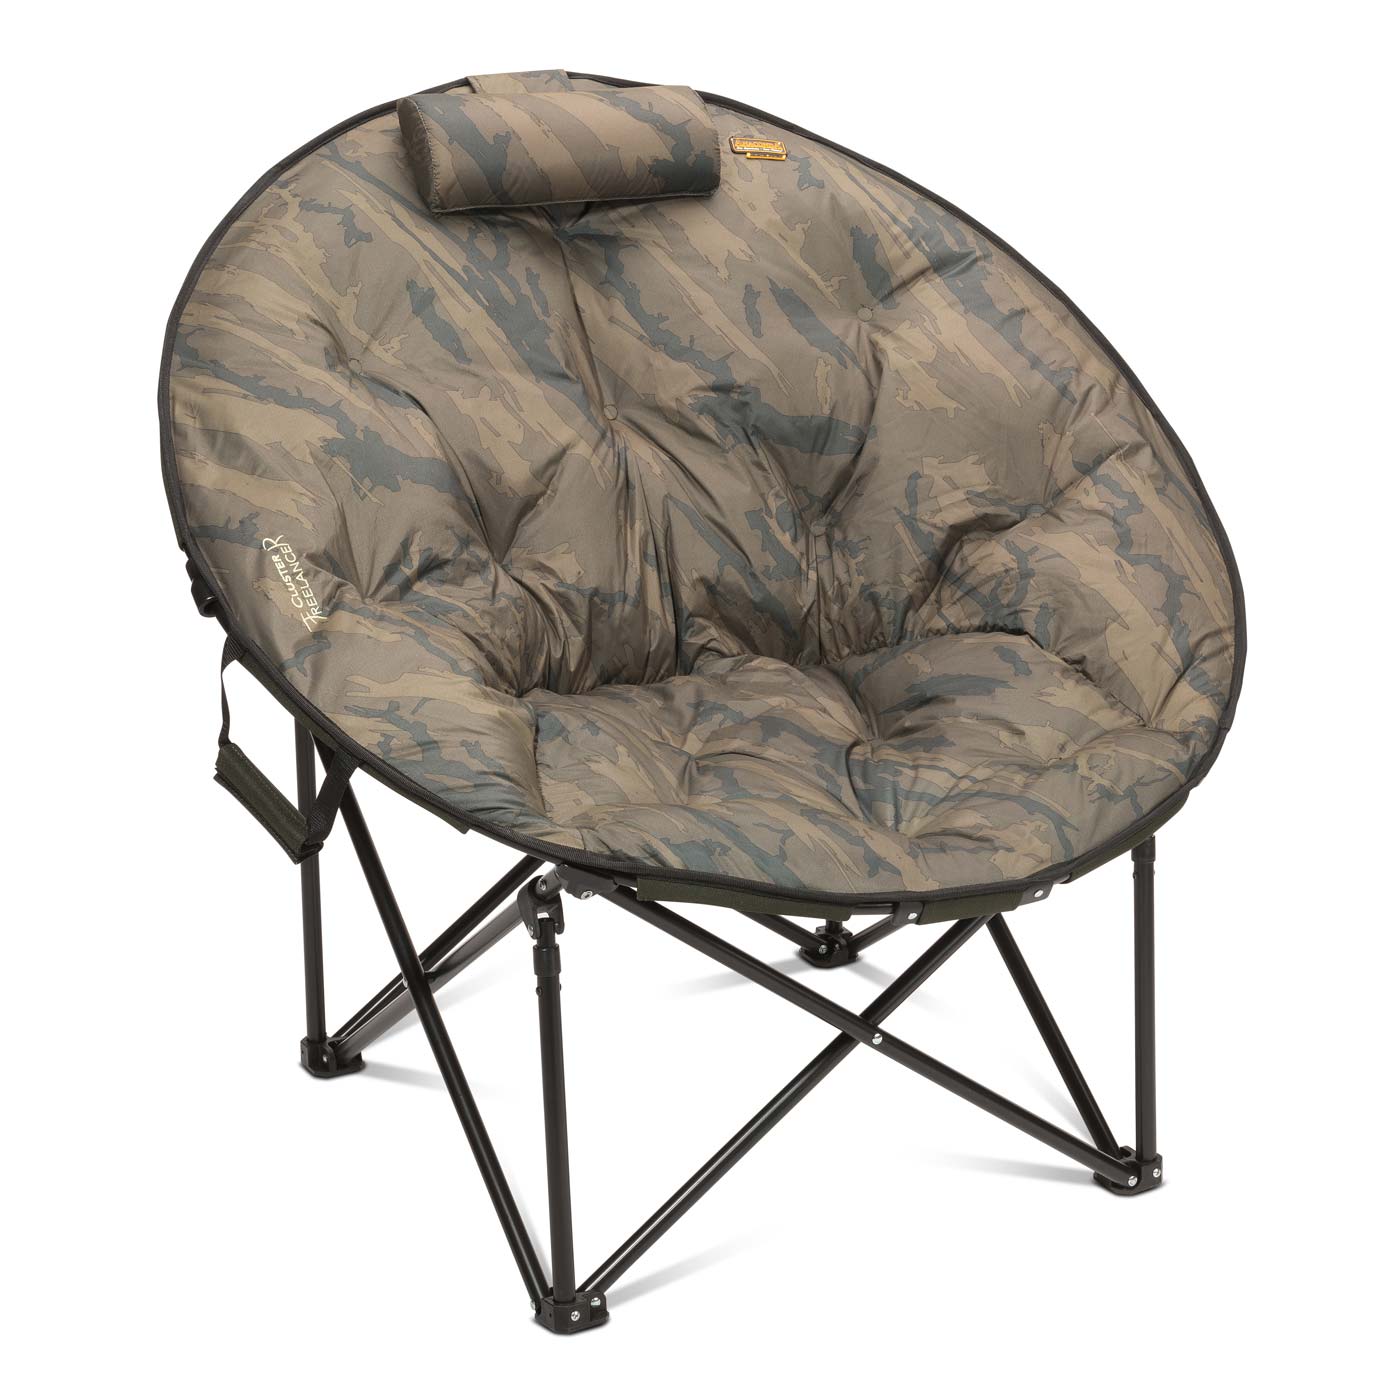 Buy fishing chair Online in Angola at Low Prices at desertcart